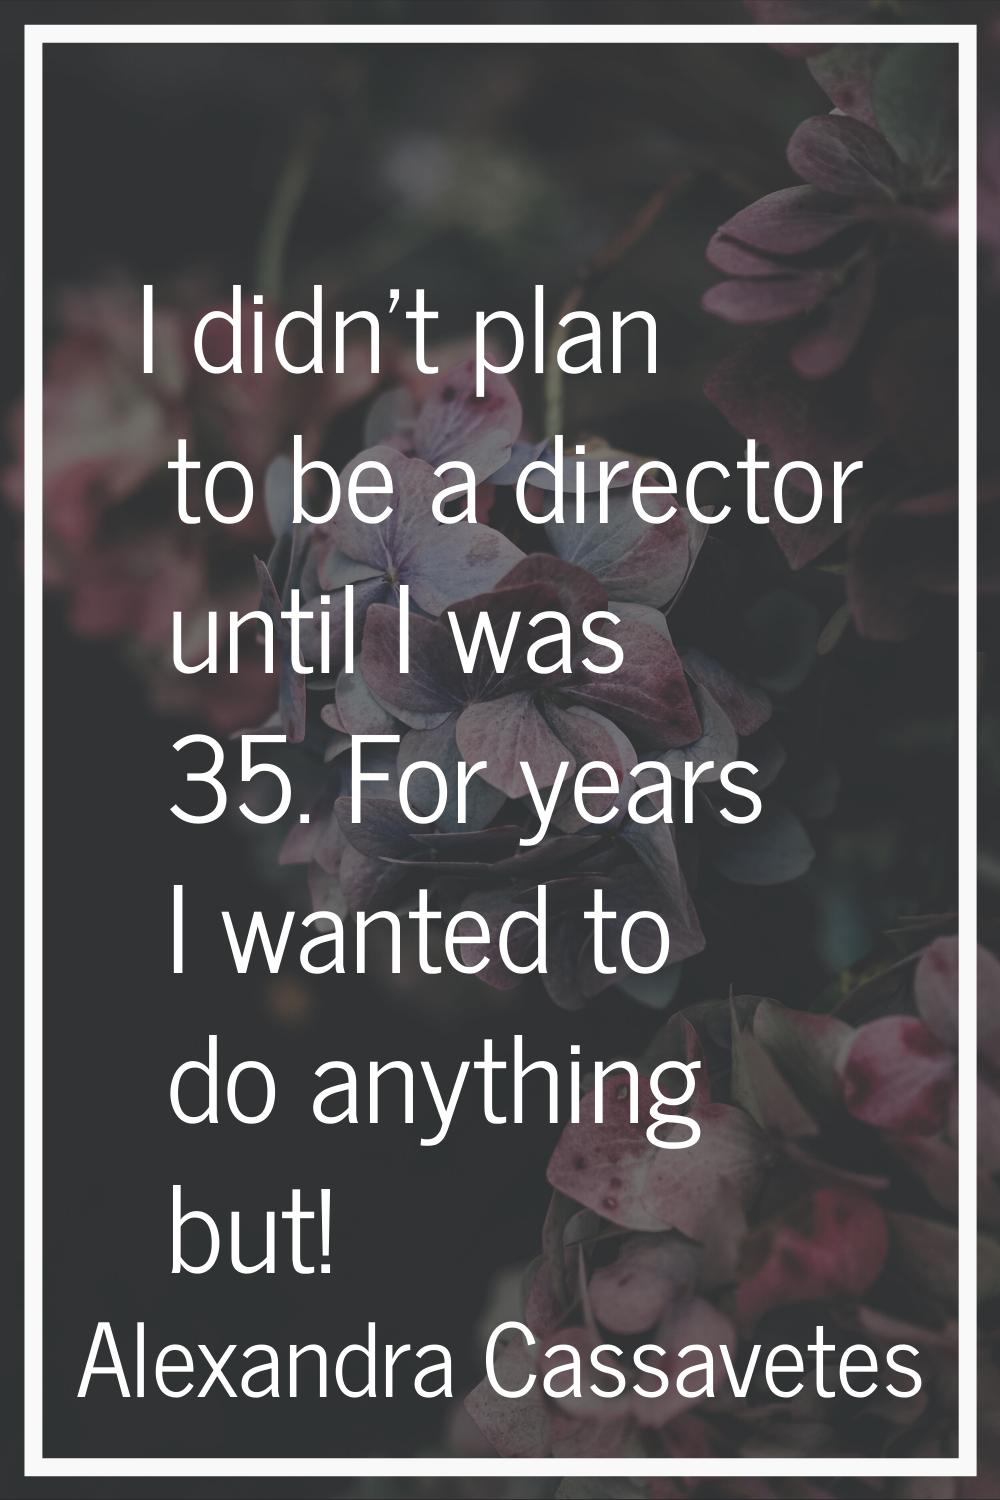 I didn't plan to be a director until I was 35. For years I wanted to do anything but!